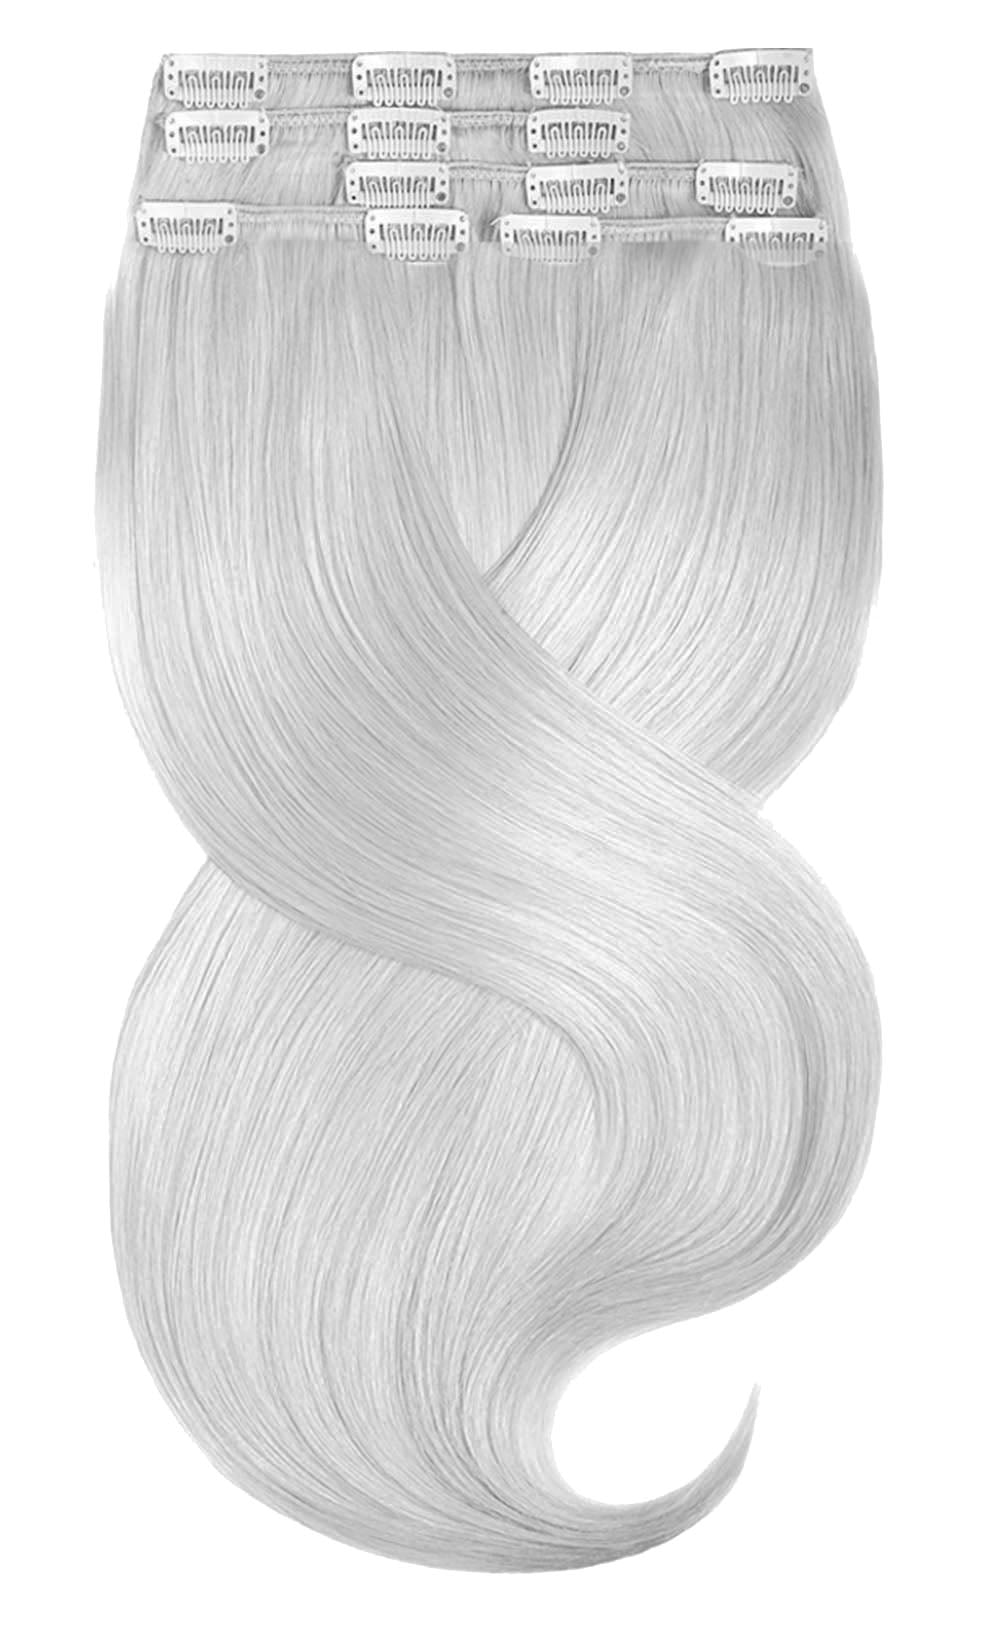 Clip-in Extensions FASHION LINE Silberblond